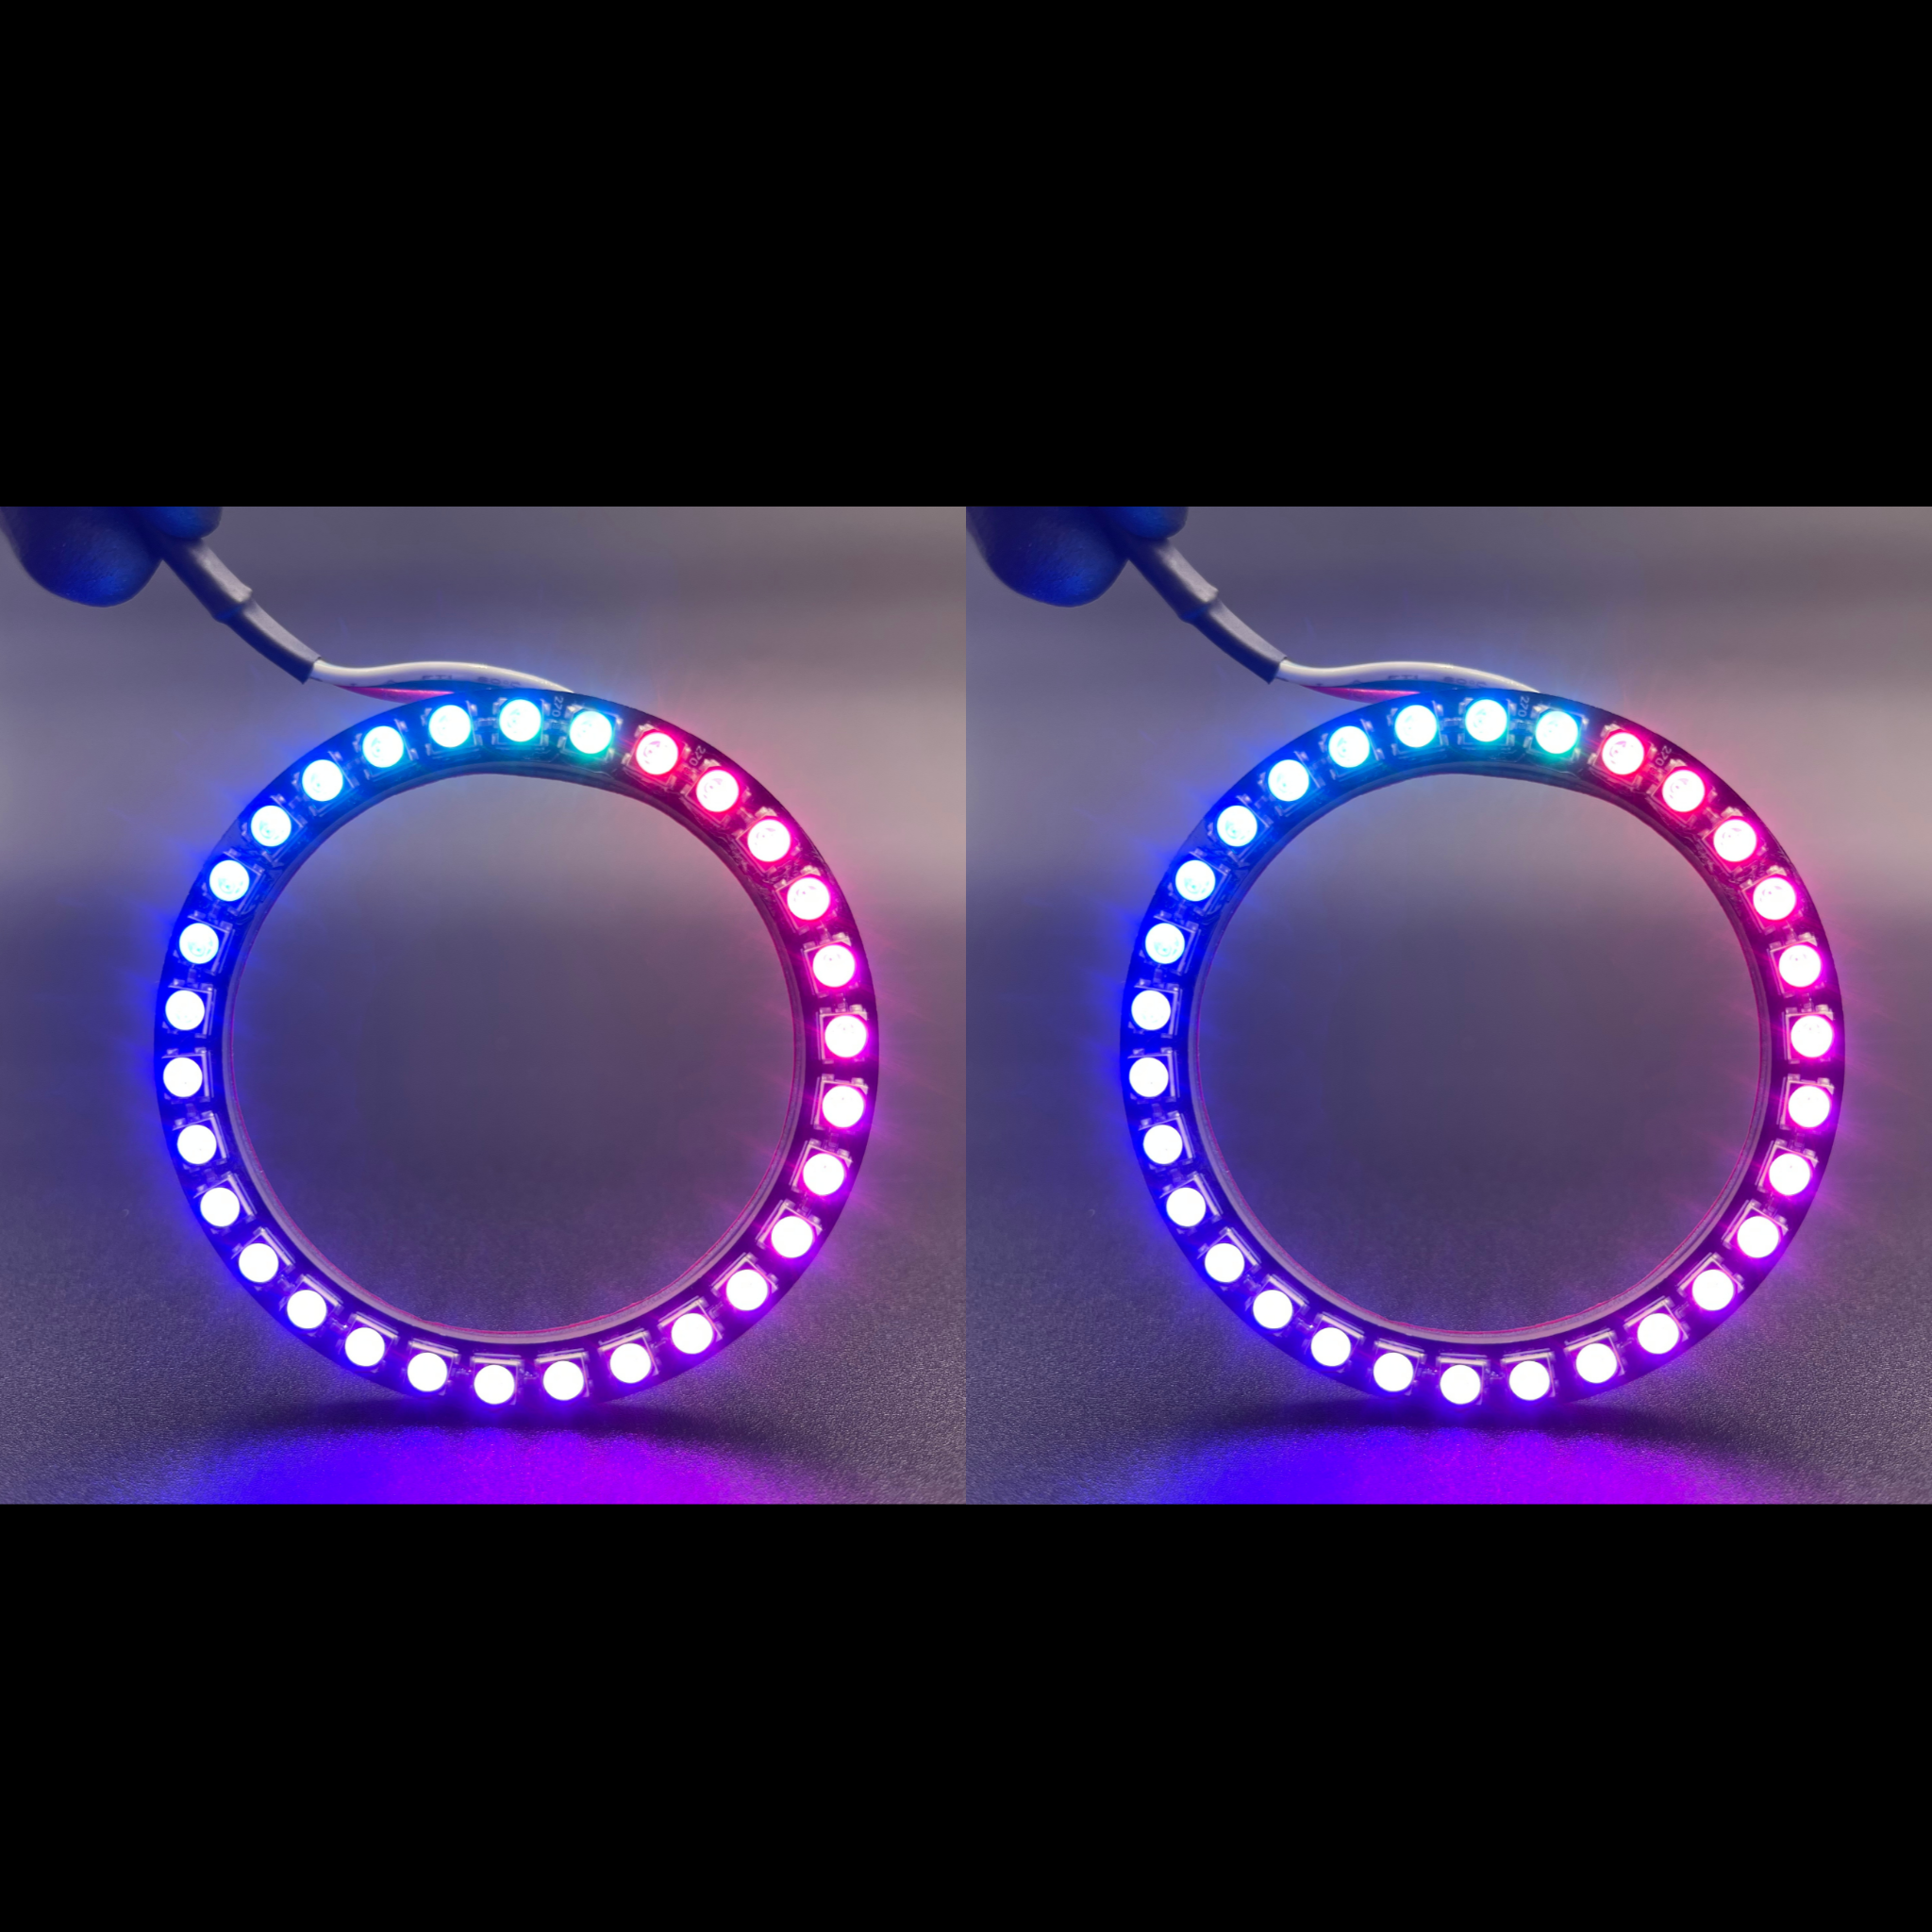 1997-2002 Ford Expedition Multicolor Halo Kit - RGB Halo Kits Multicolor Flow Series Color Chasing RGBWA LED headlight kit Oracle Lighting Trendz OneUpLighting Morimoto theretrofitsource AutoLEDTech Diode Dynamics